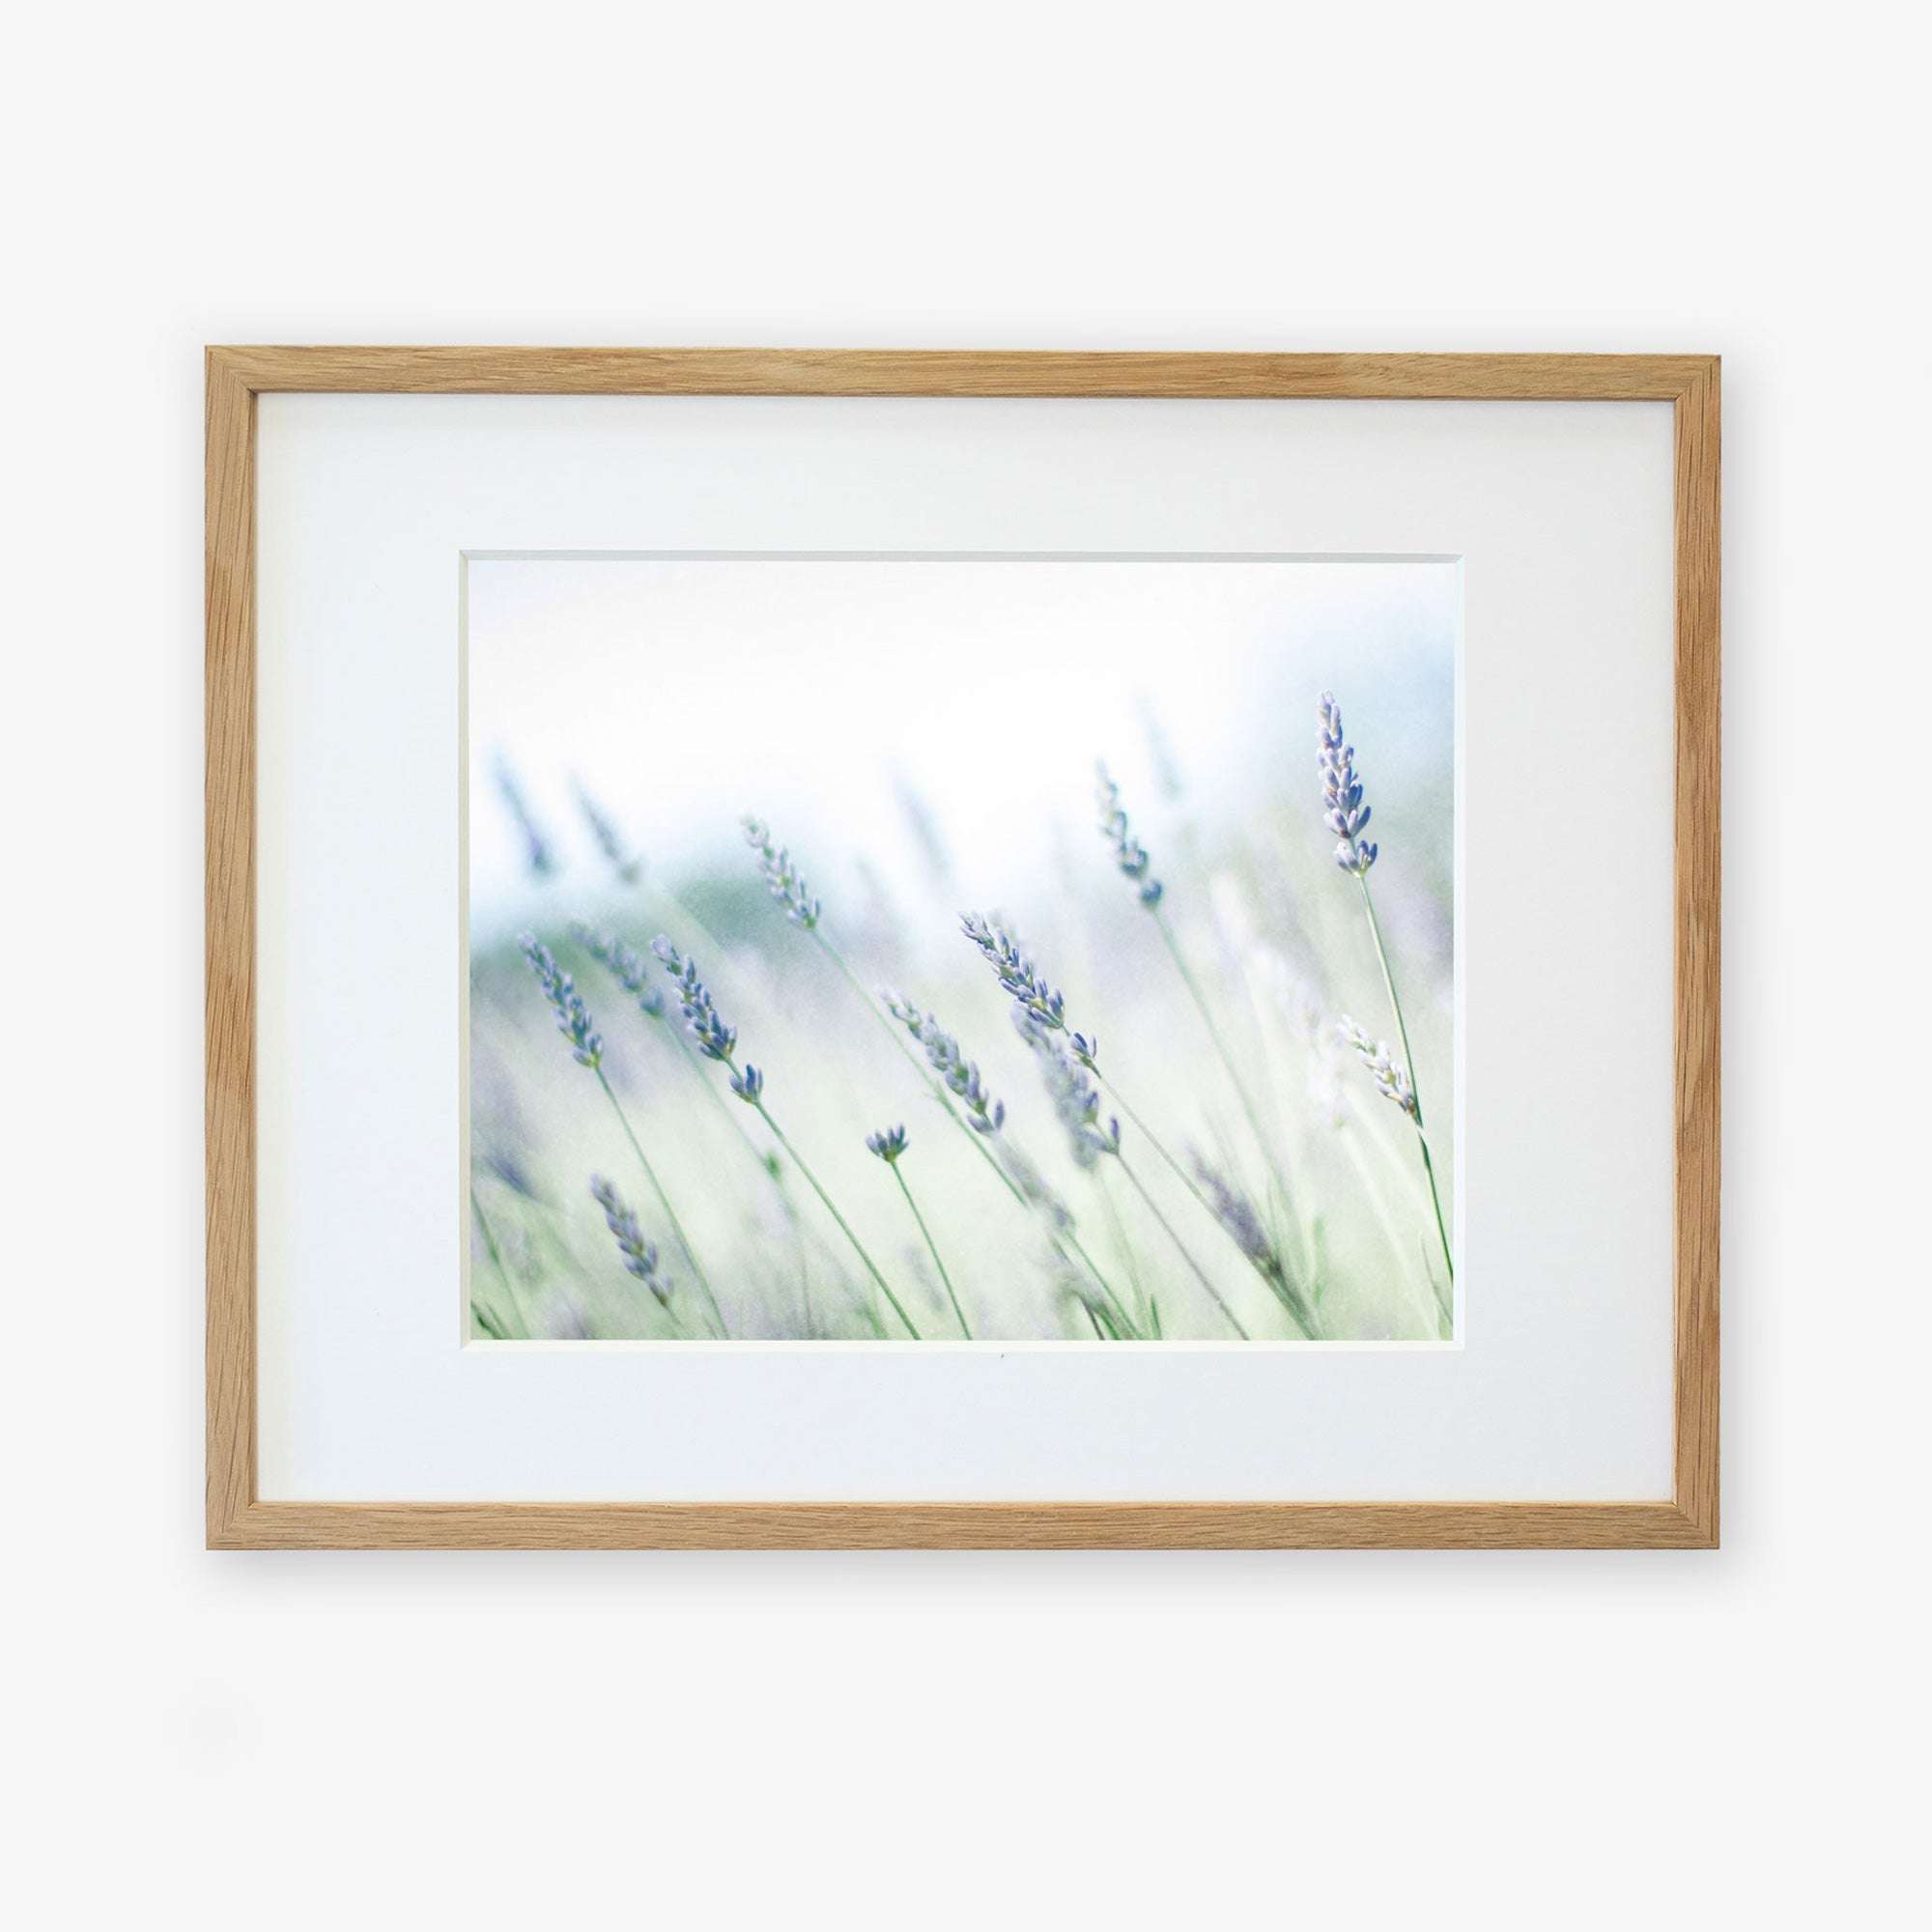 A framed photograph of Rustic Farmhouse Floral Wall Art, &#39;Buds of Lavender&#39; from Offley Green, displayed in soft focus, with a gentle, dreamy effect enhancing the light pastel colors. The frame is simple and made of light wood.